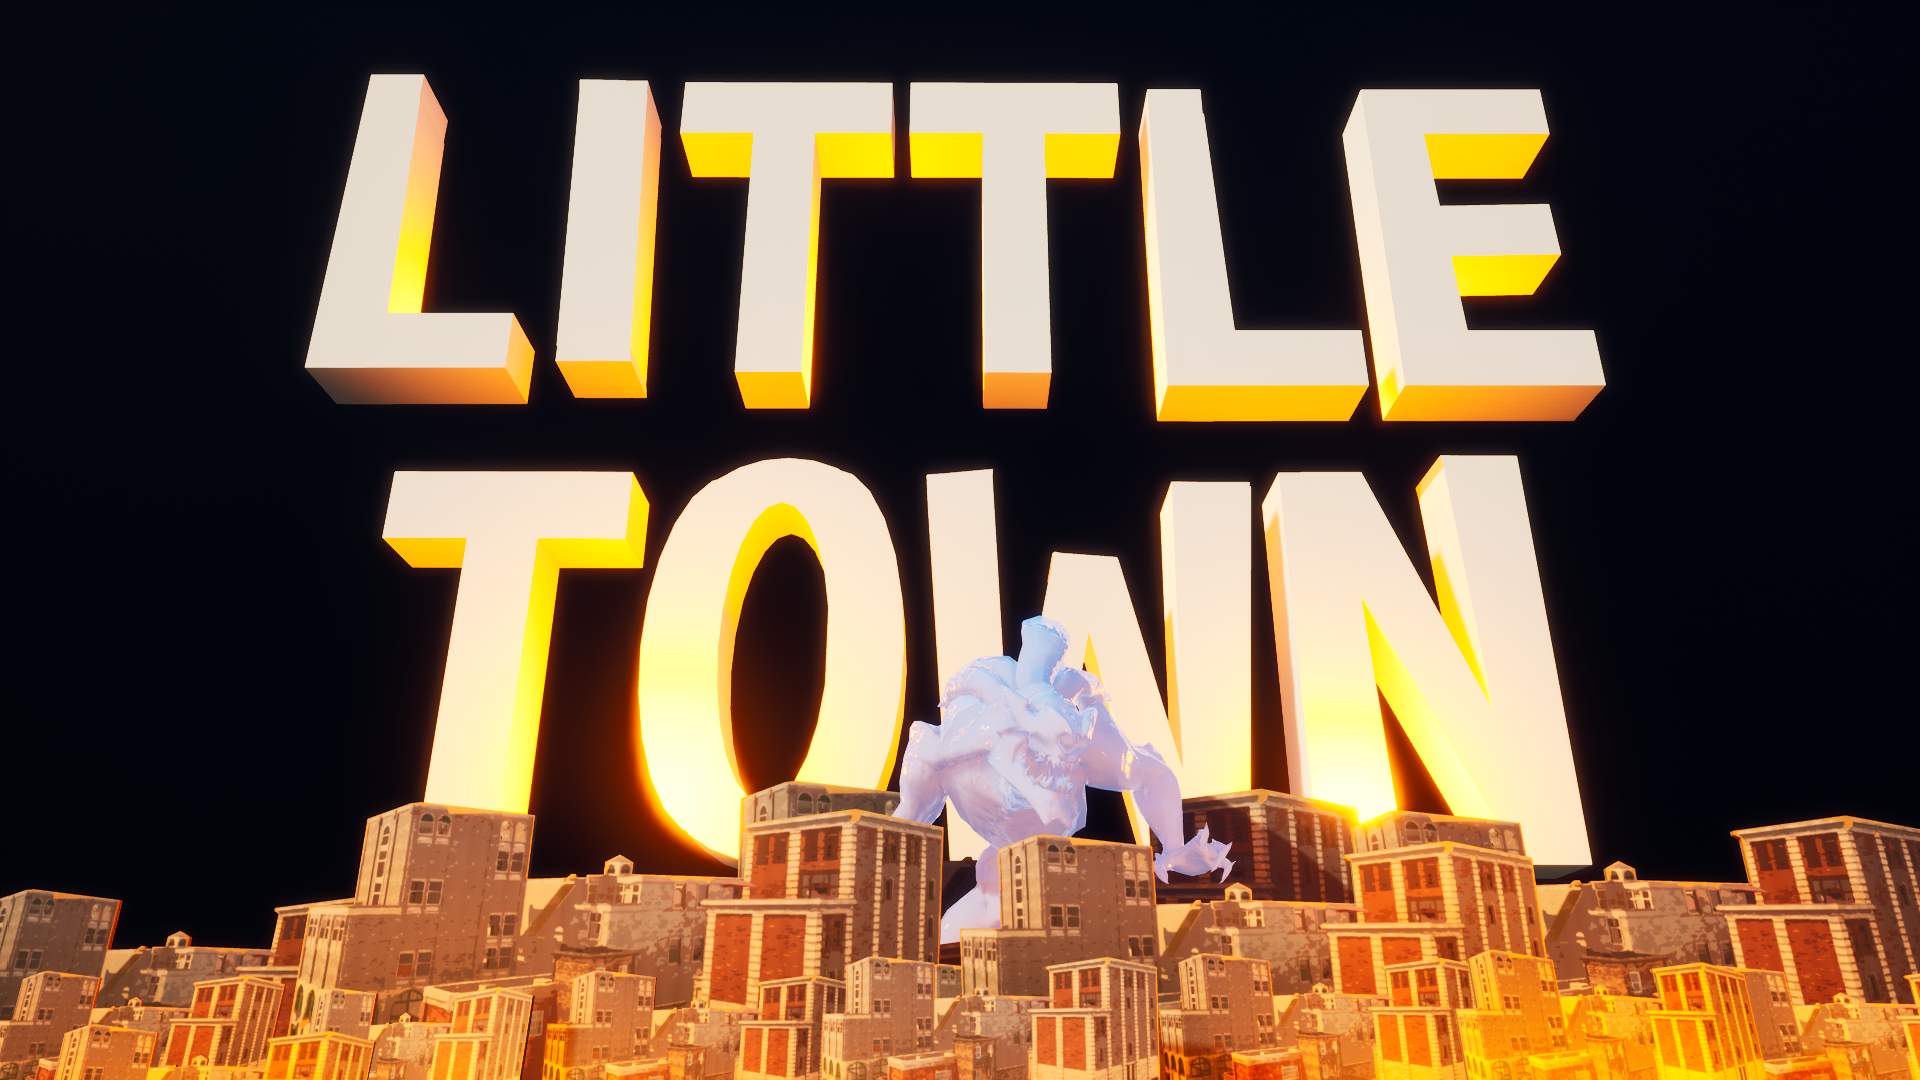 PROPHUNT - LITTLE TOWN